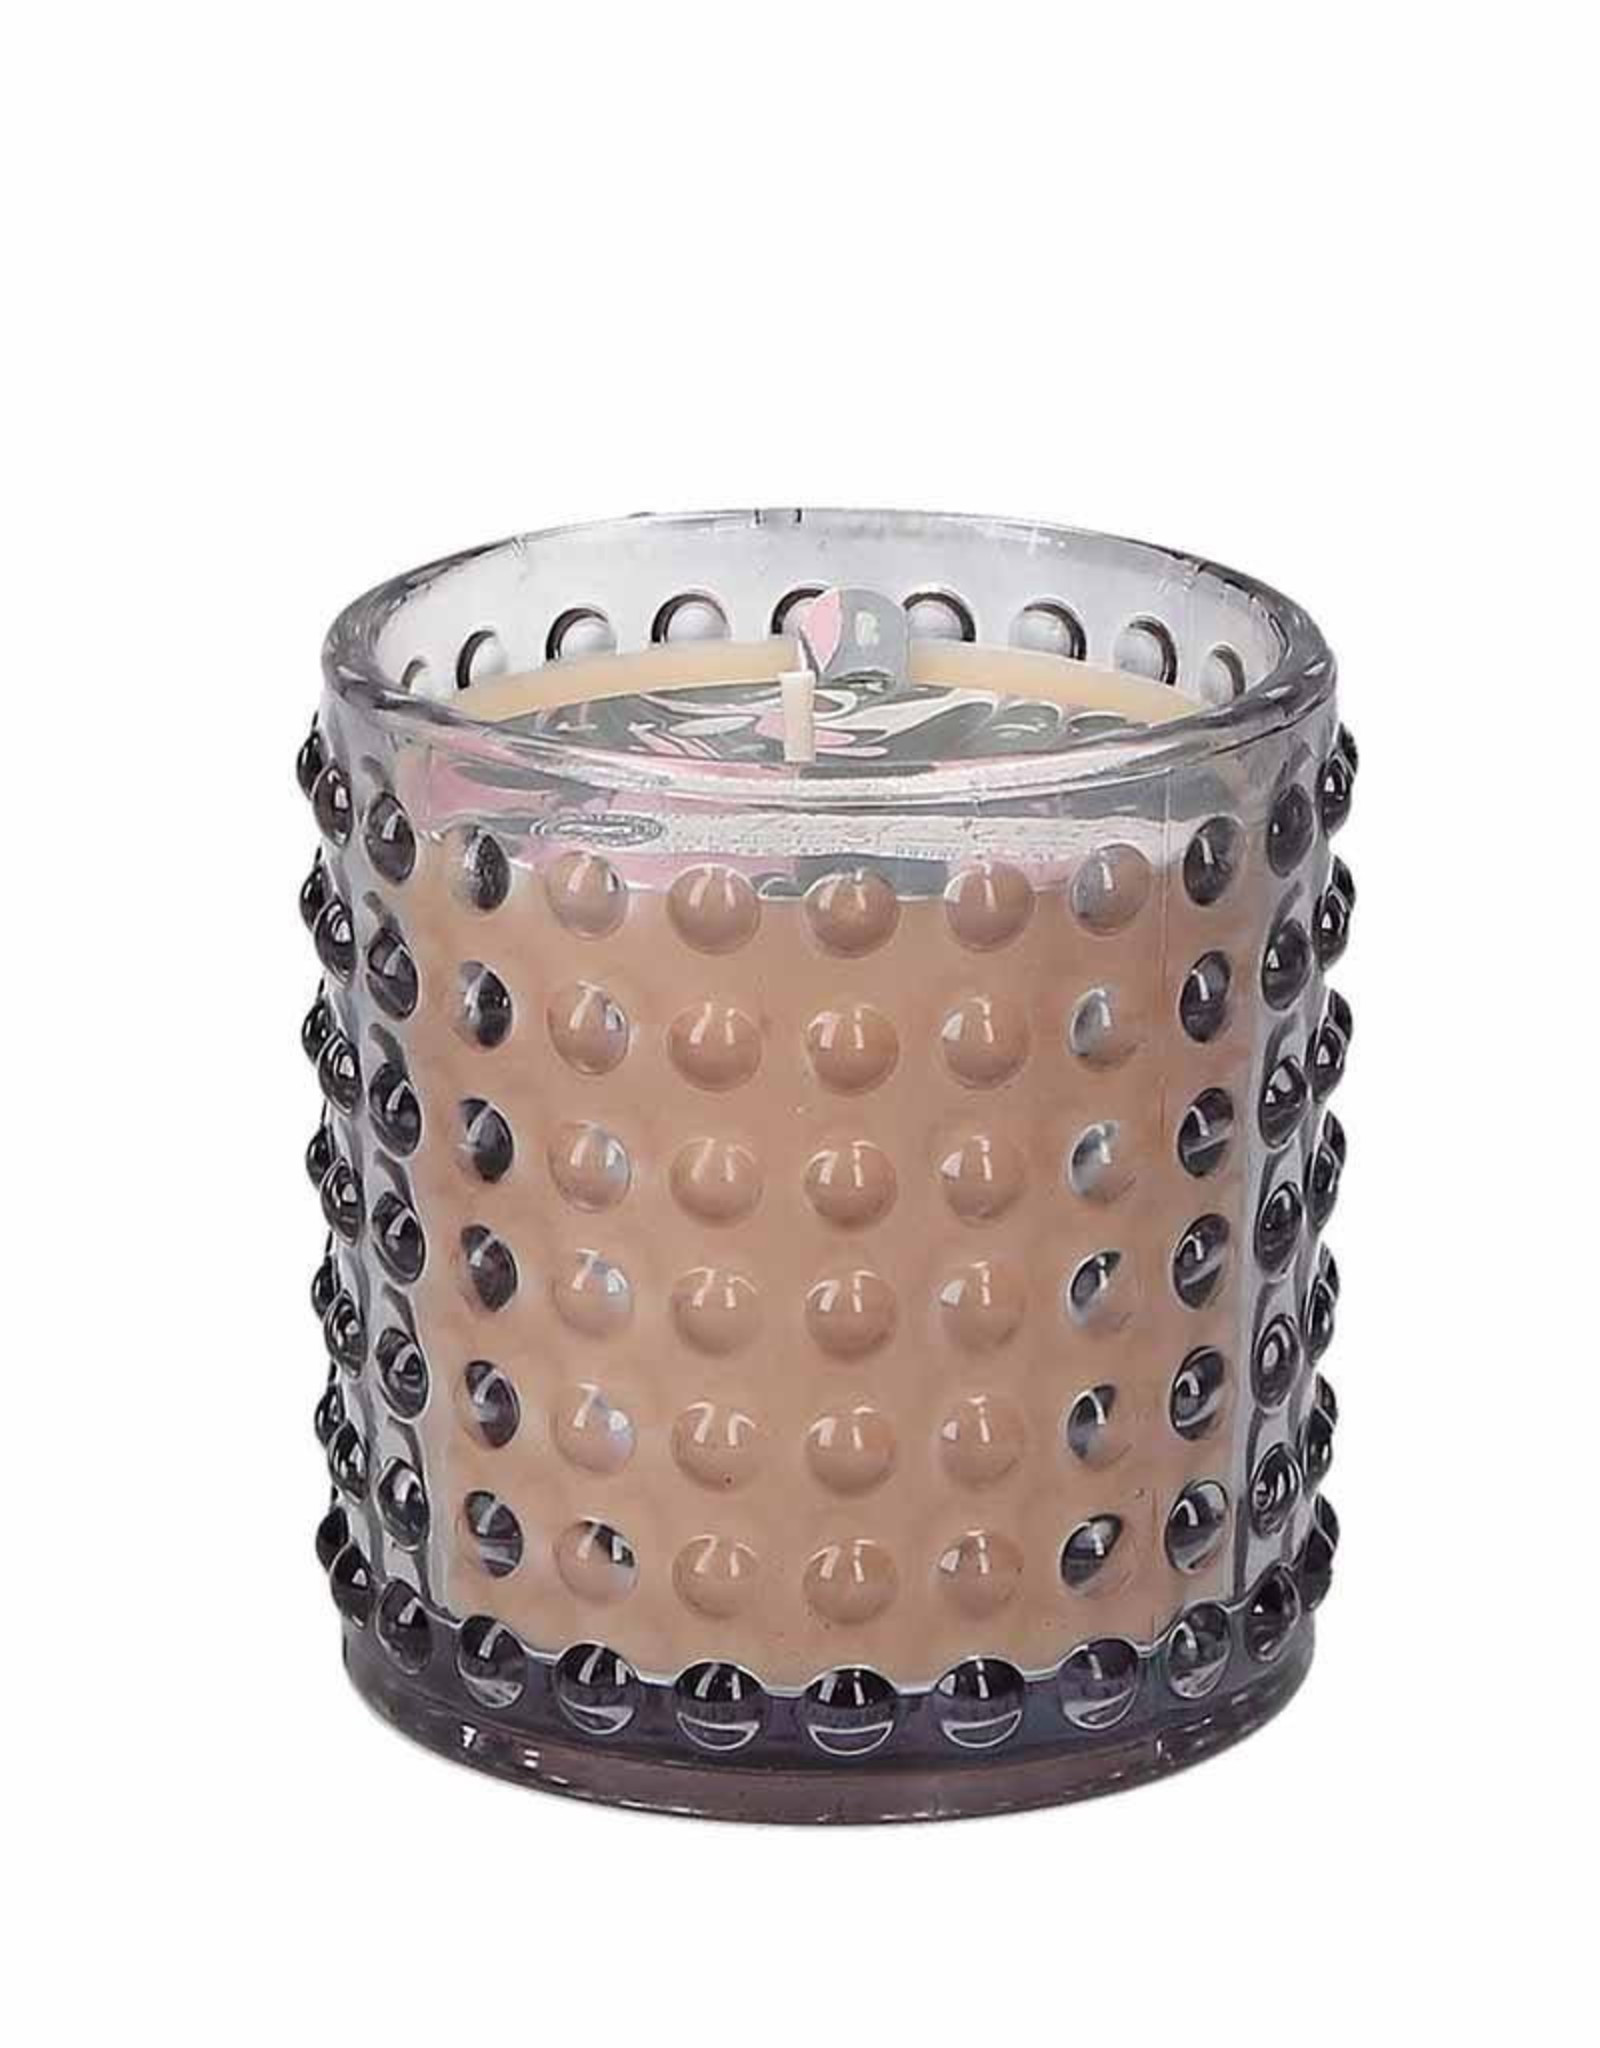 bridgewater sweet grace - #031 candle in hobnail glass